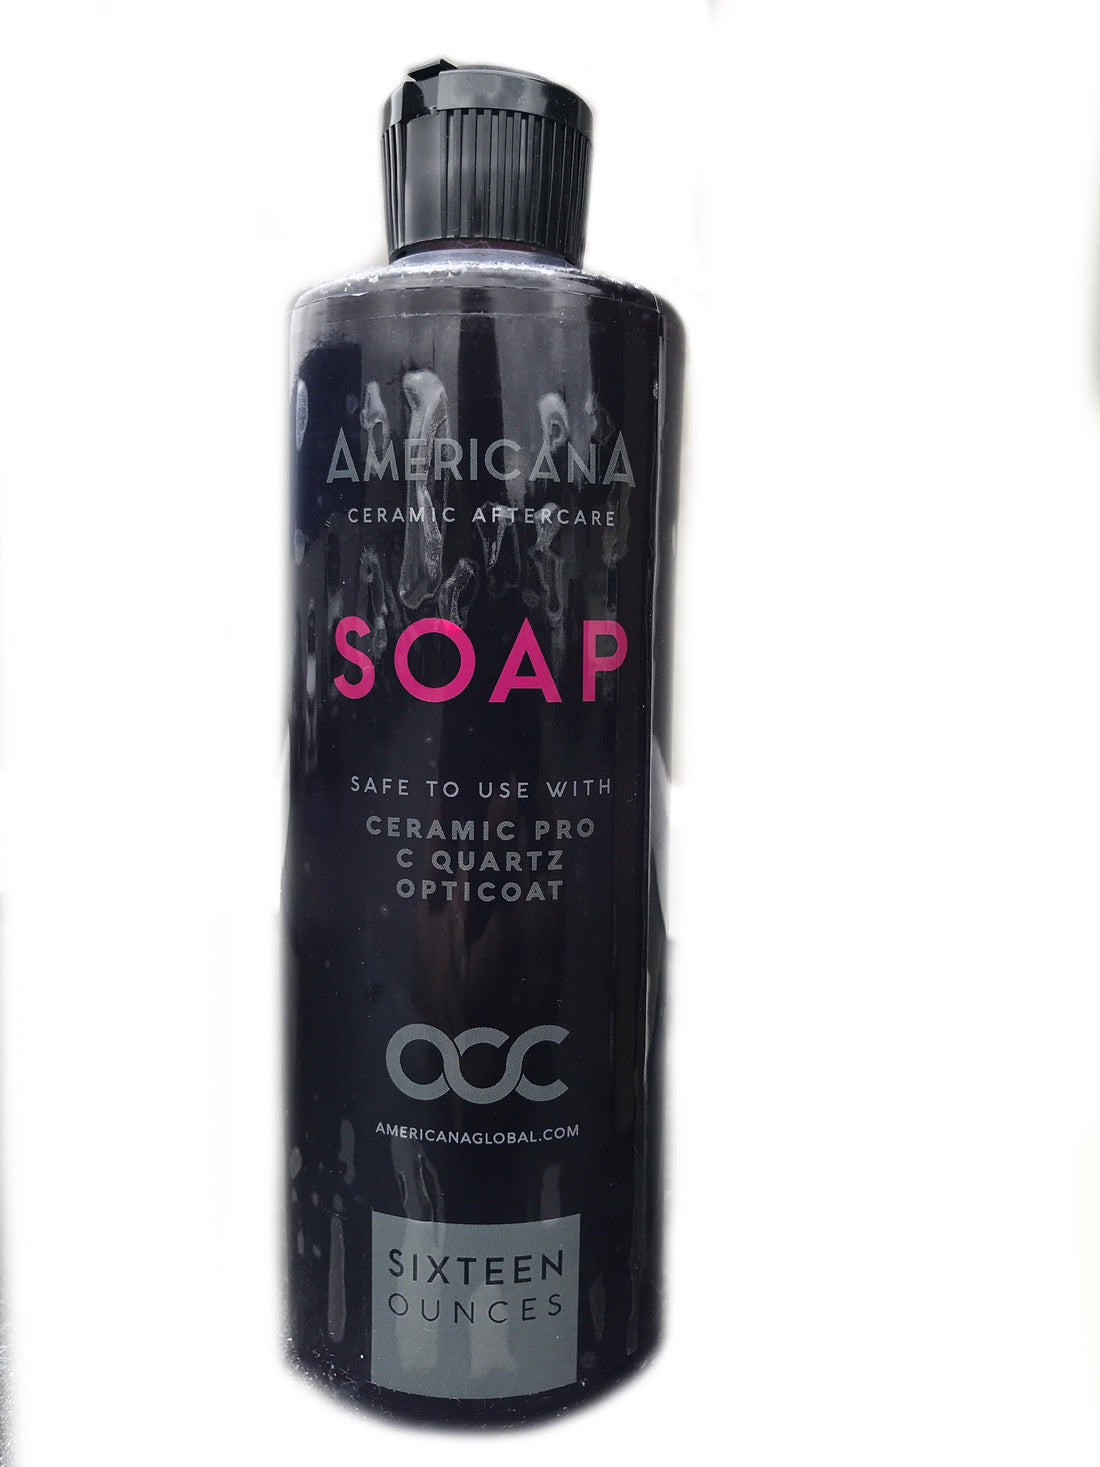 Americana Ceramic Aftercare Soap 16oz - Detailing Connect